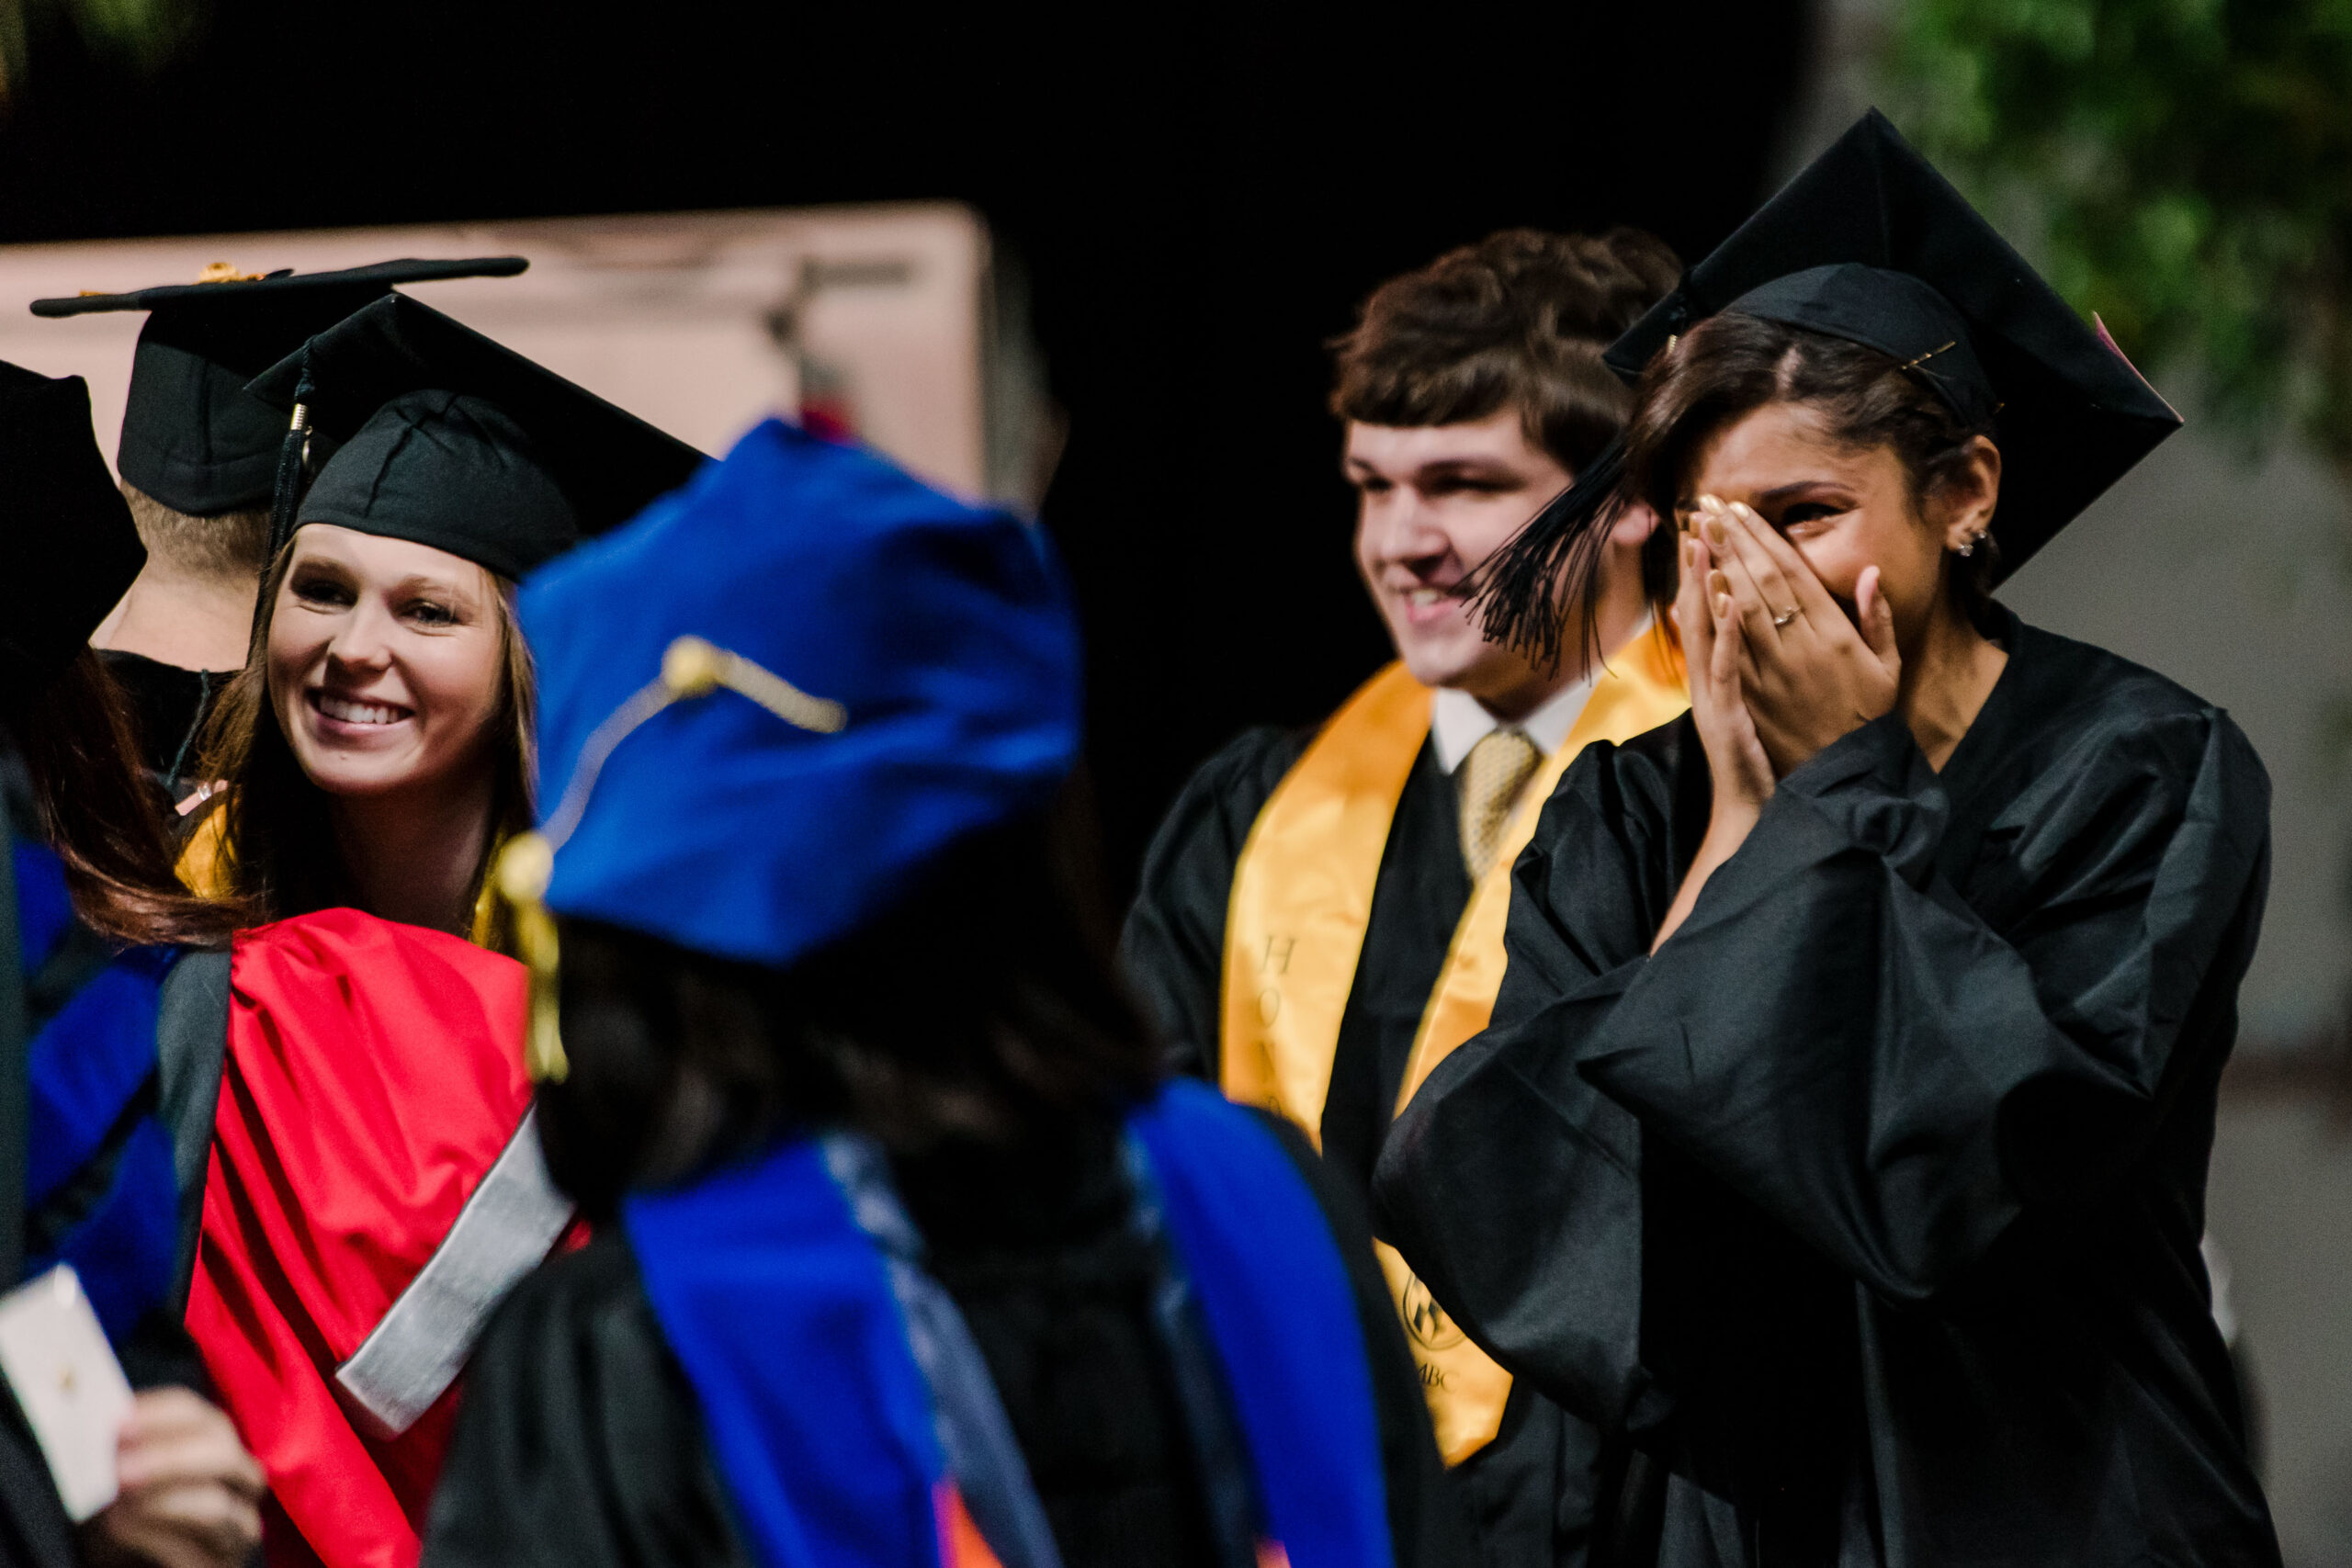 girl surrounded by others in graduation garbs happily covers face